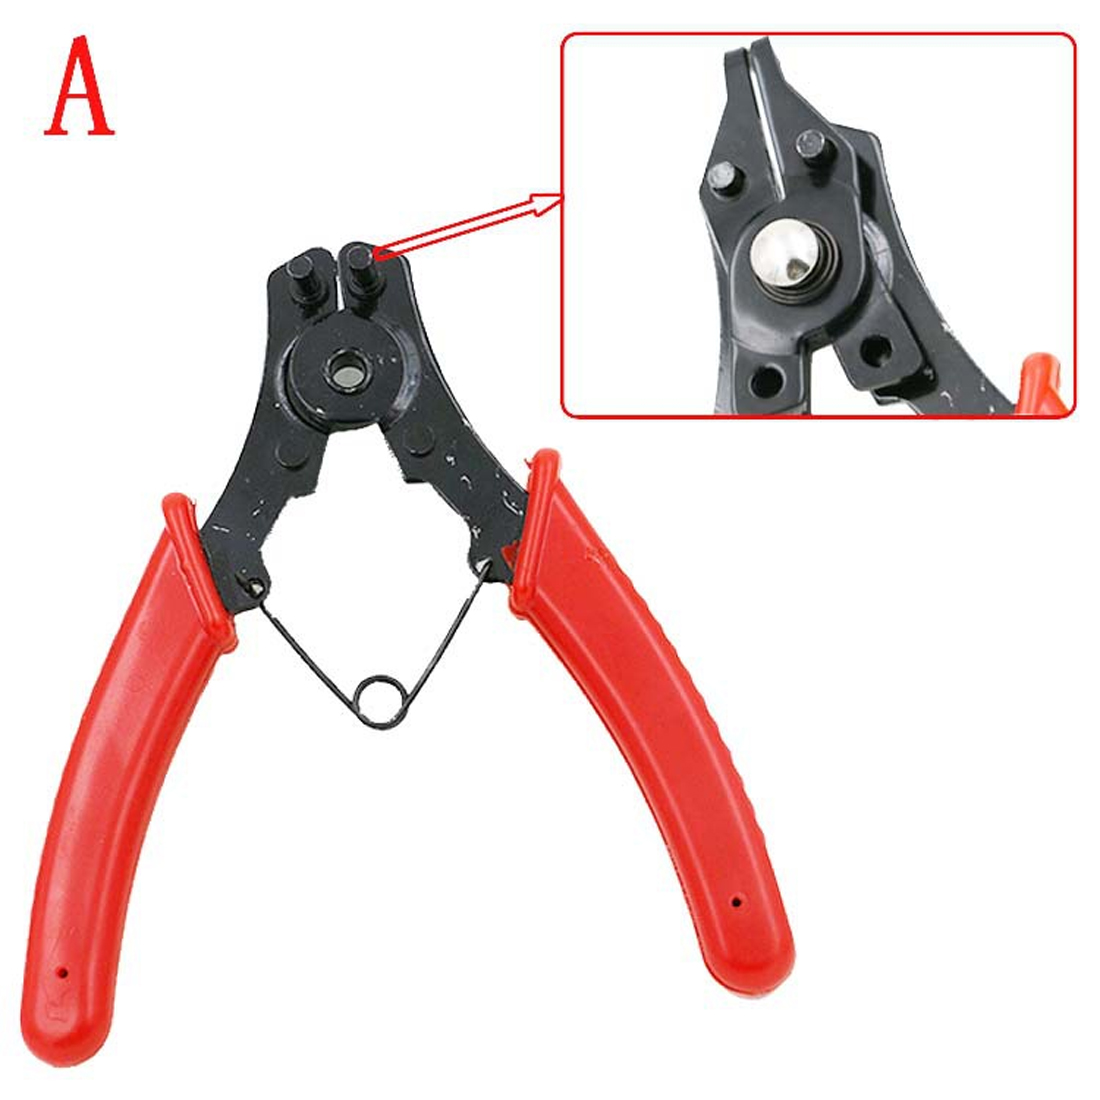 4 in 1 Circlip Snap Ring Plier Four Headed Pliers Fastener Shaft Used Spring Disassembly Puller Springs Multitool Pliers Set